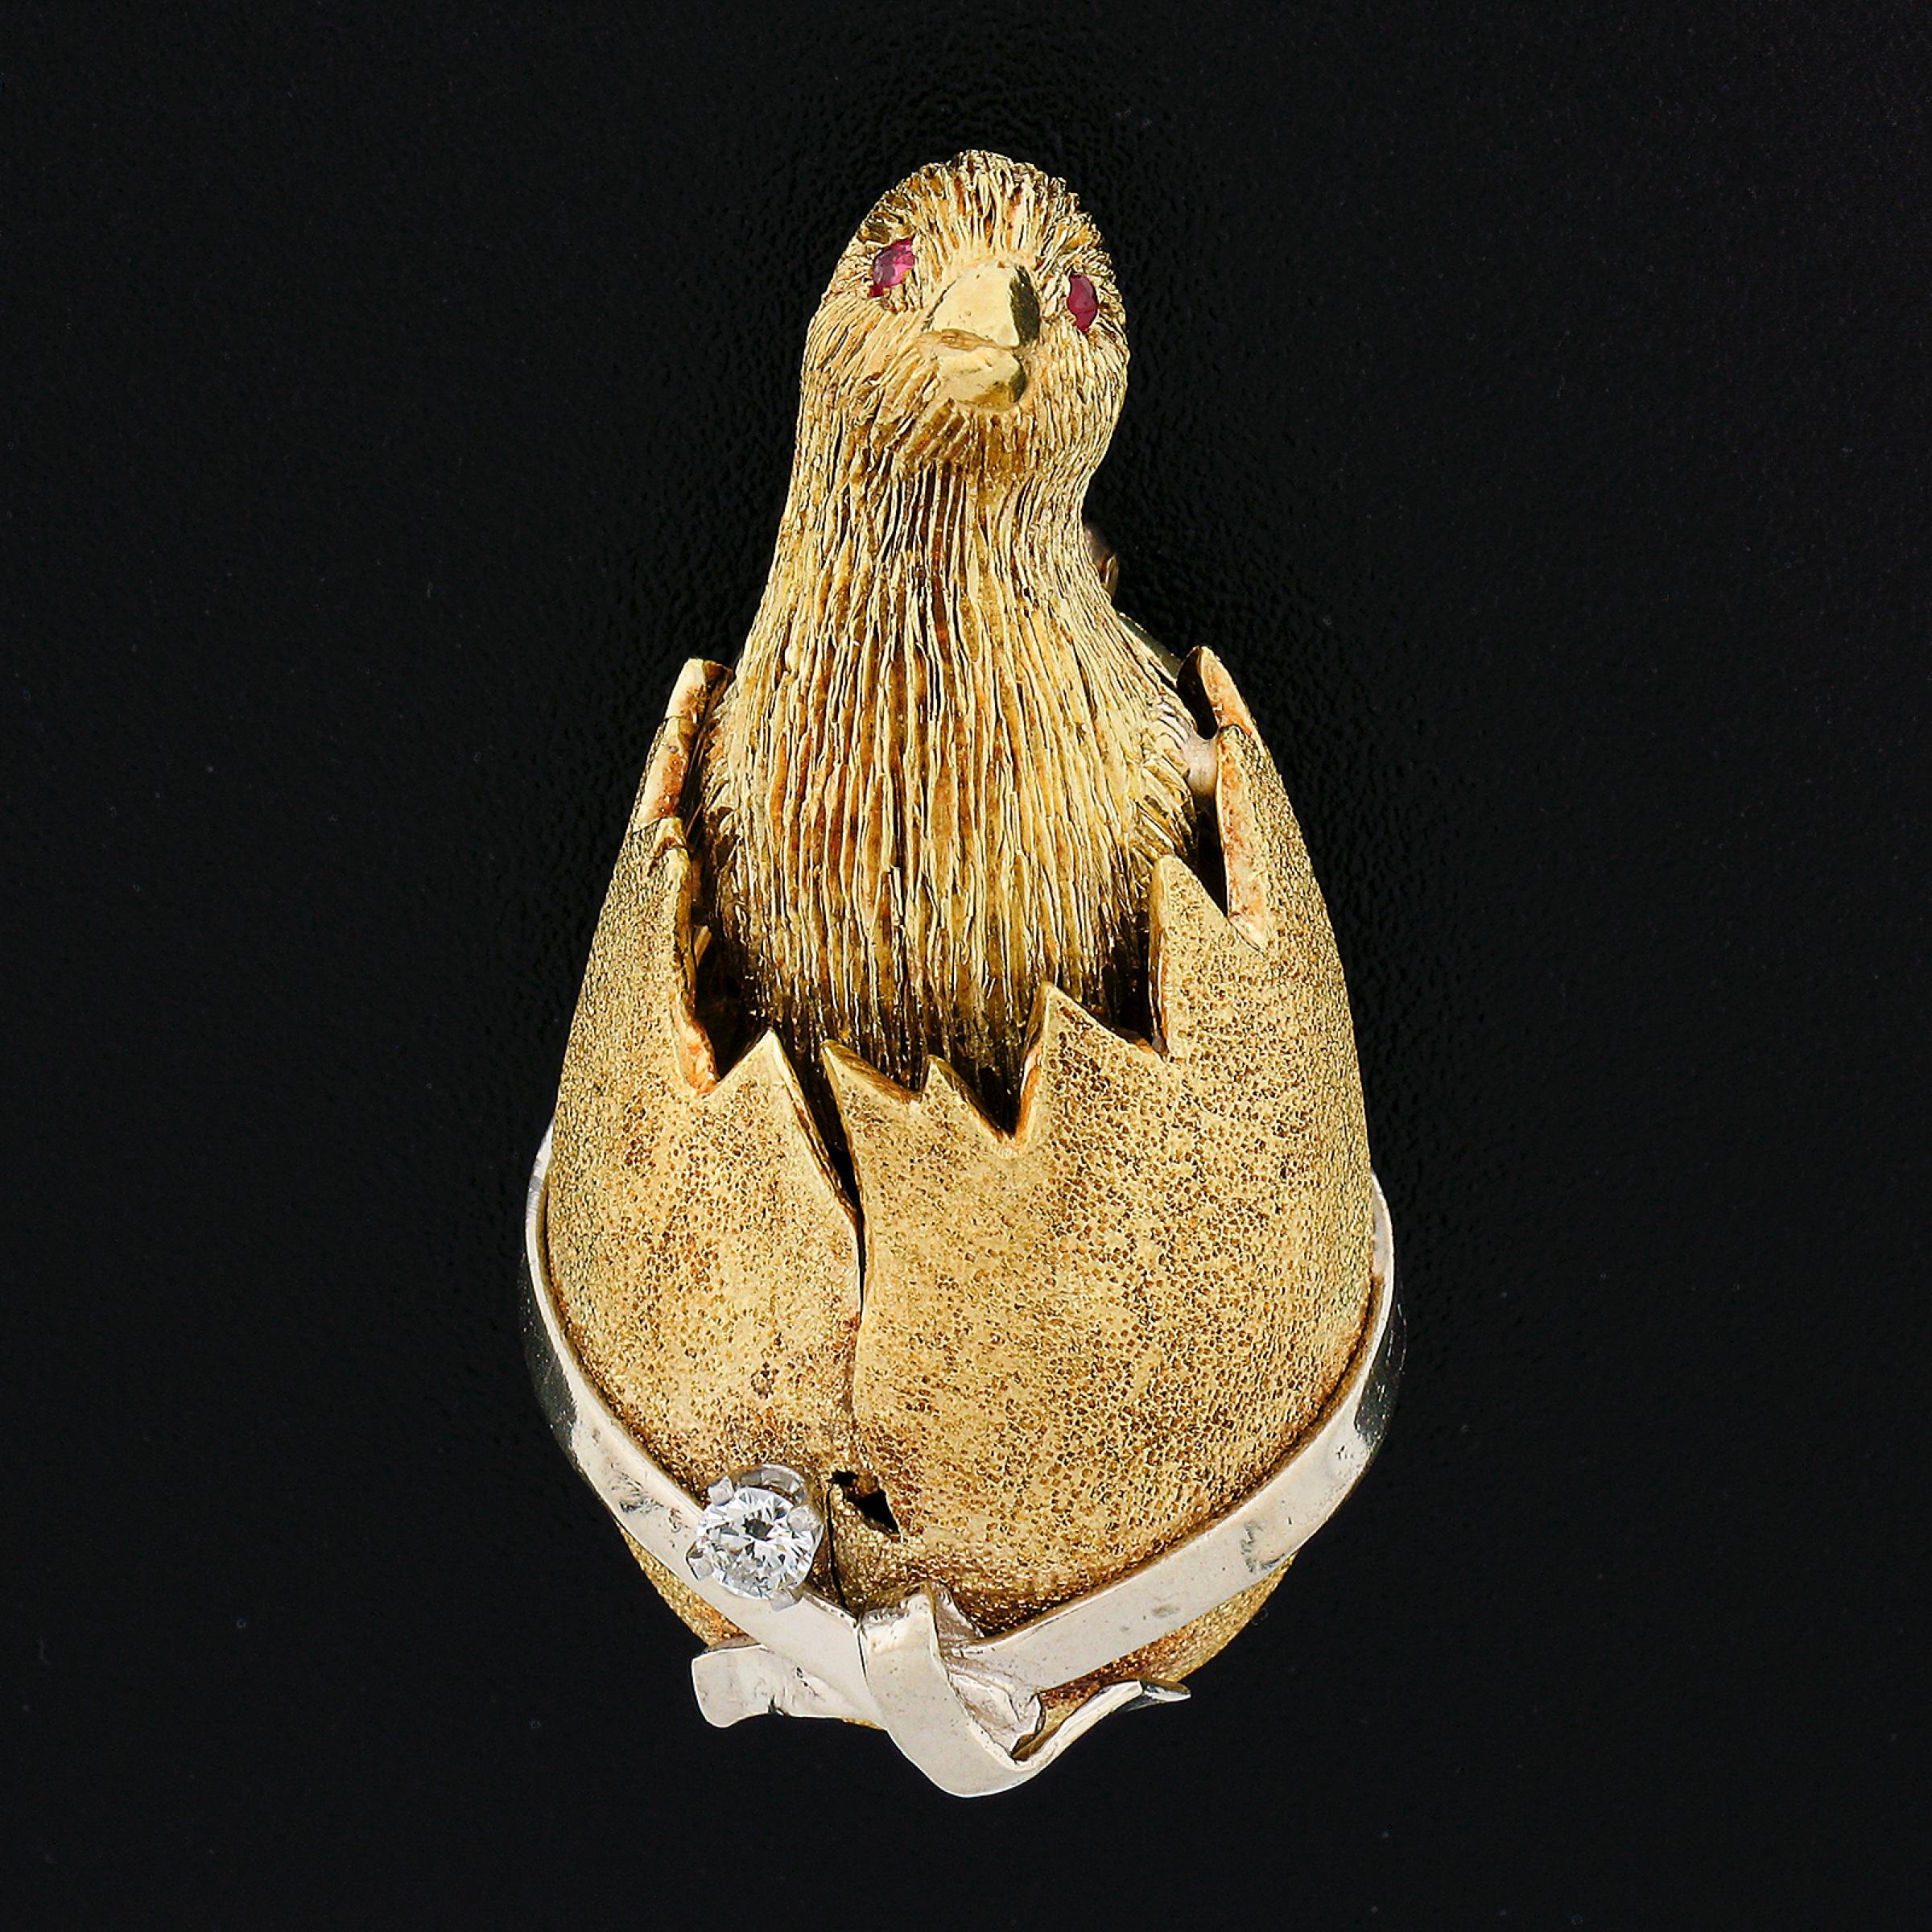 This wonderful and very well made pin/brooch features an incredibly well detailed design of a cute chick breaking out of an egg. The chick's eyes are set with vivid red rubies while the egg is wrapped with a white gold ribbon and a natural brilliant